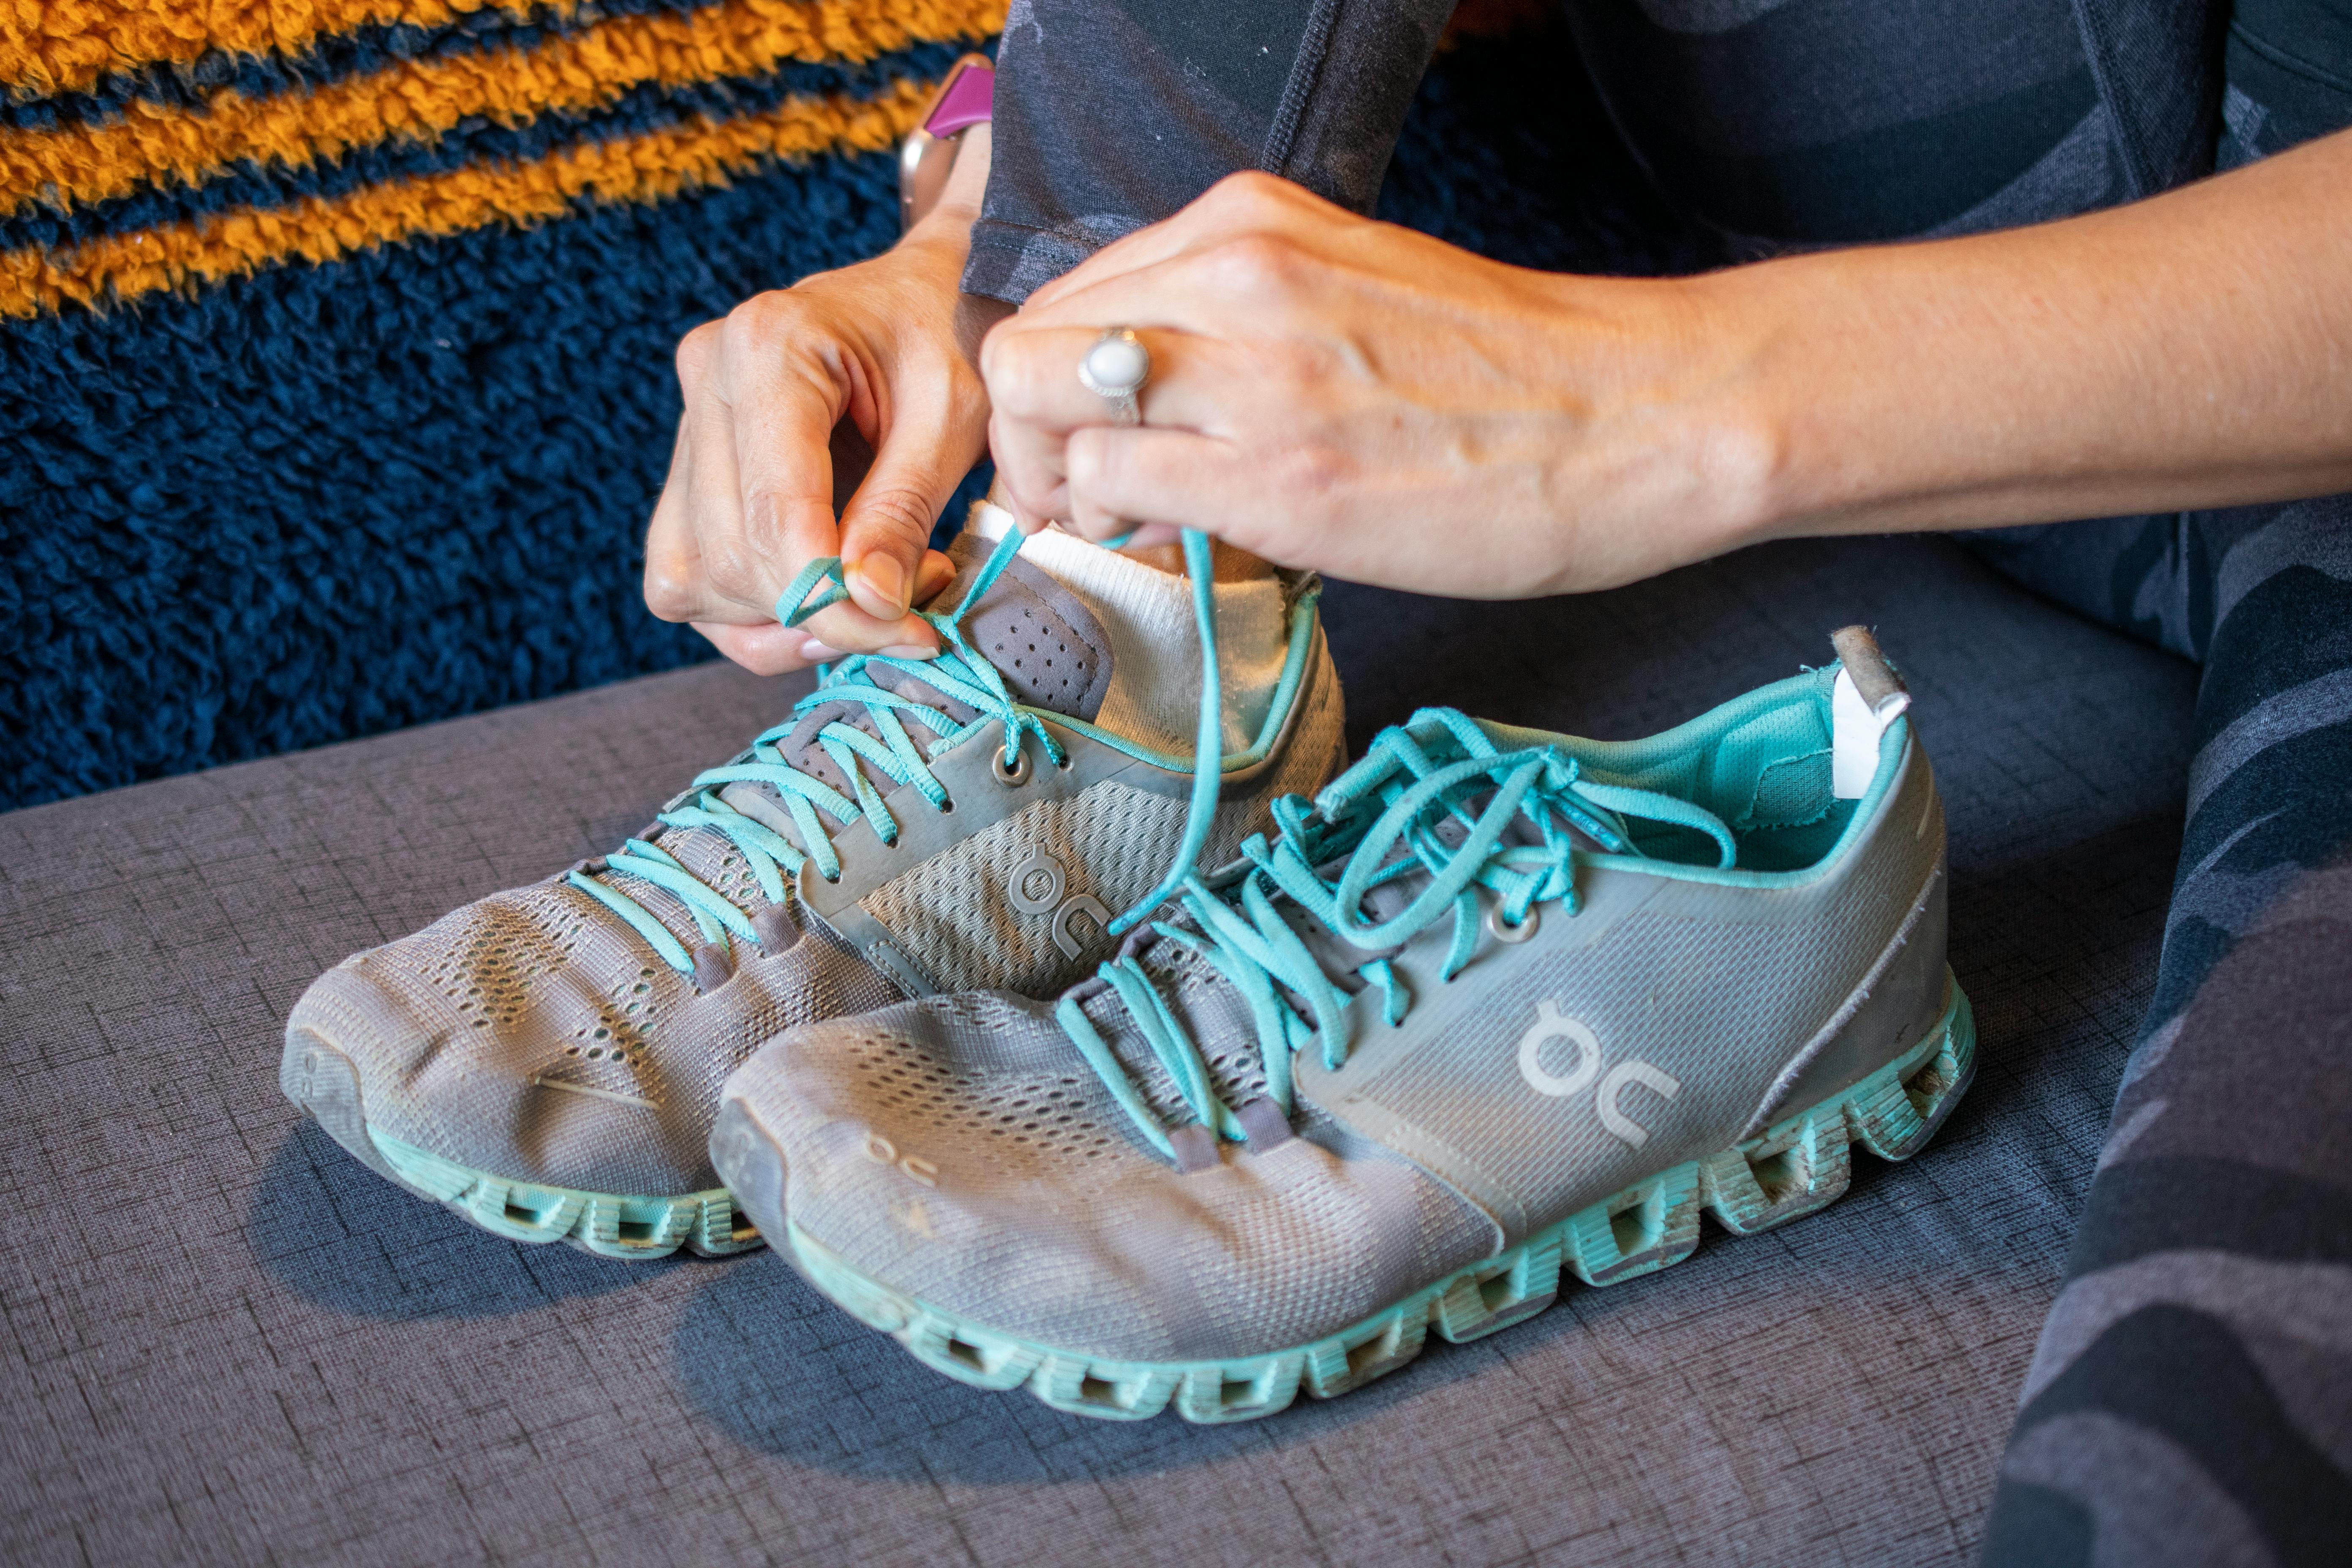 A woman tying the laces on a running shoe